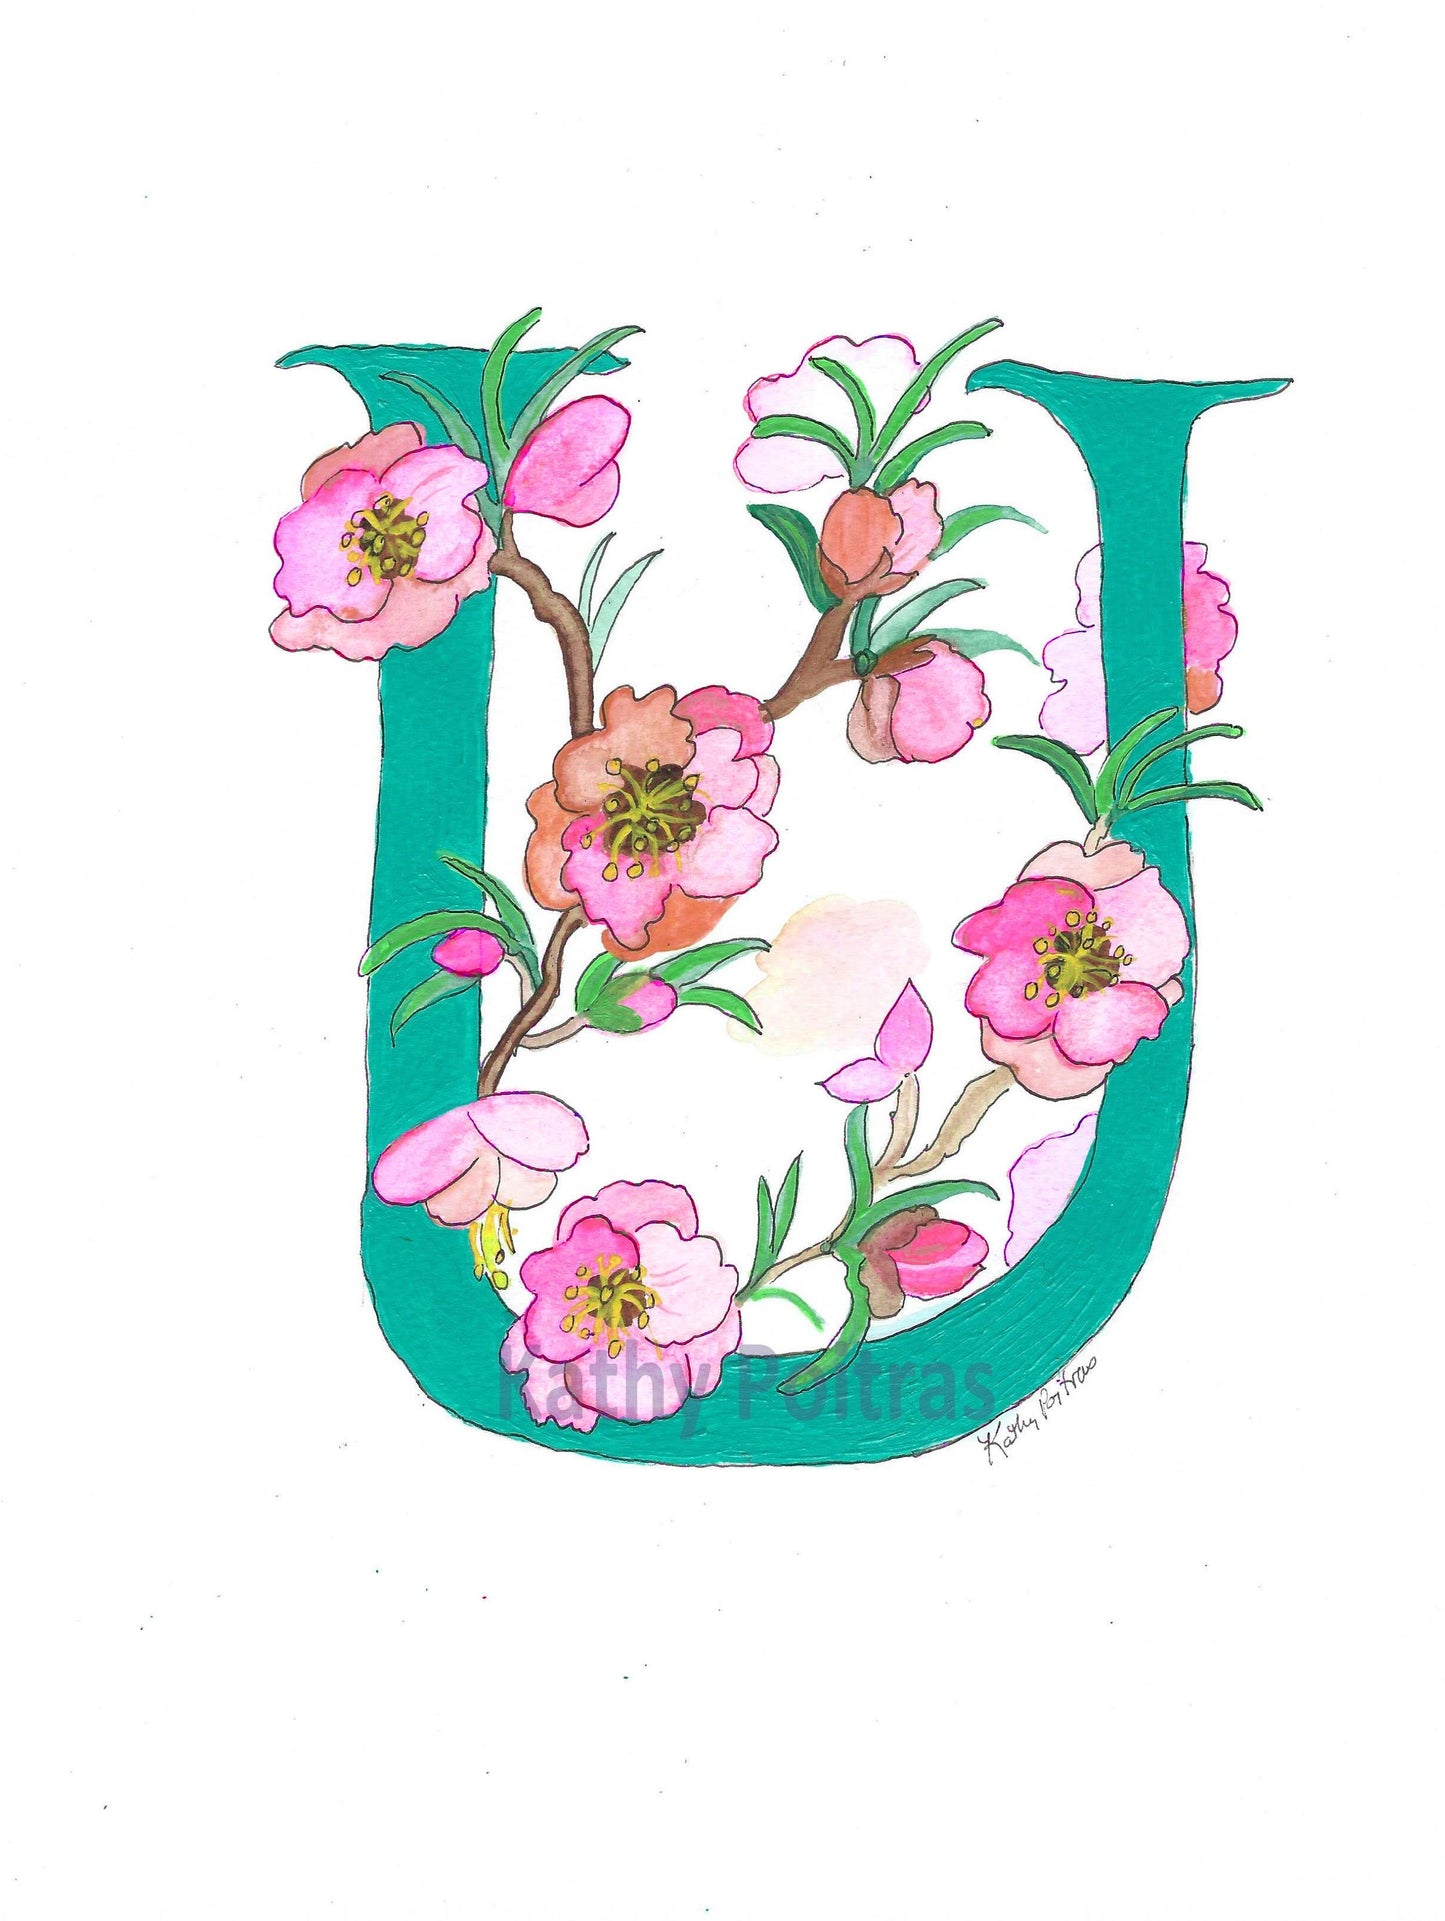 U for Ume flowers by artist Kathy Poitras. 